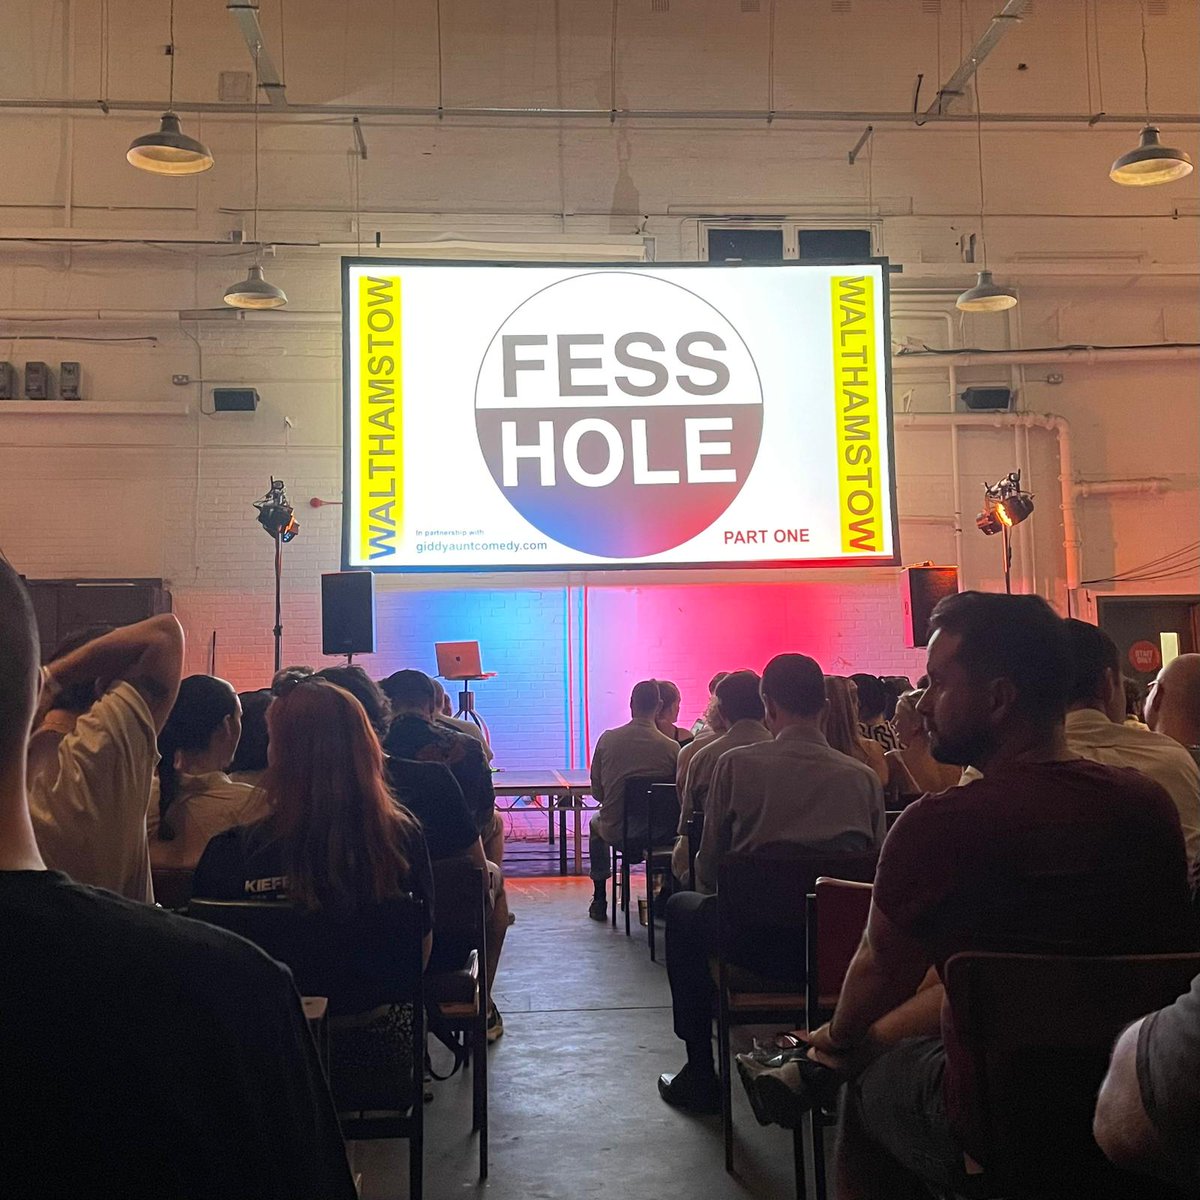 Enjoying watching thye hilarious anonymous confessions at @fesshole Live!